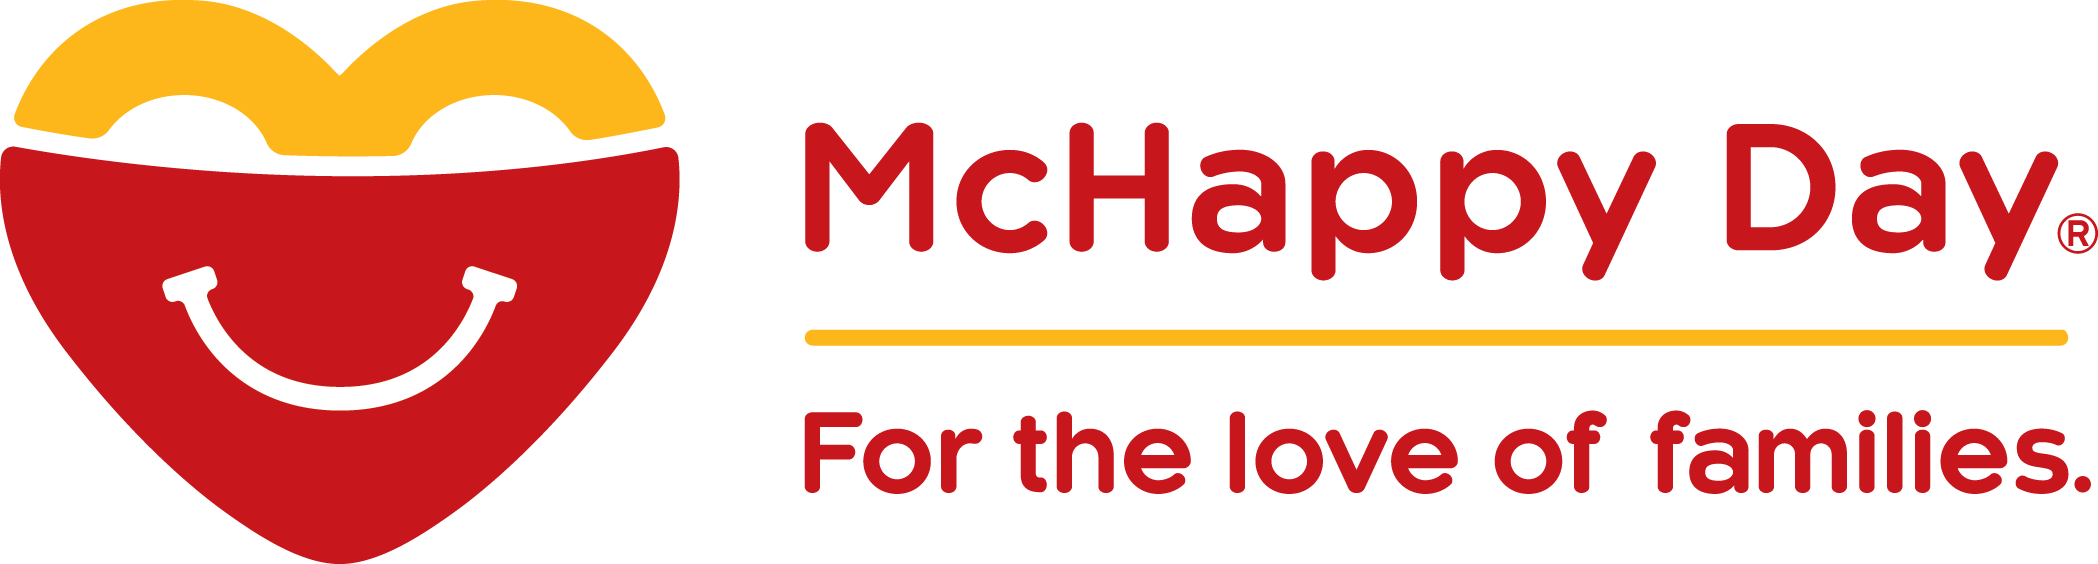 Image result for mchappy day 2018